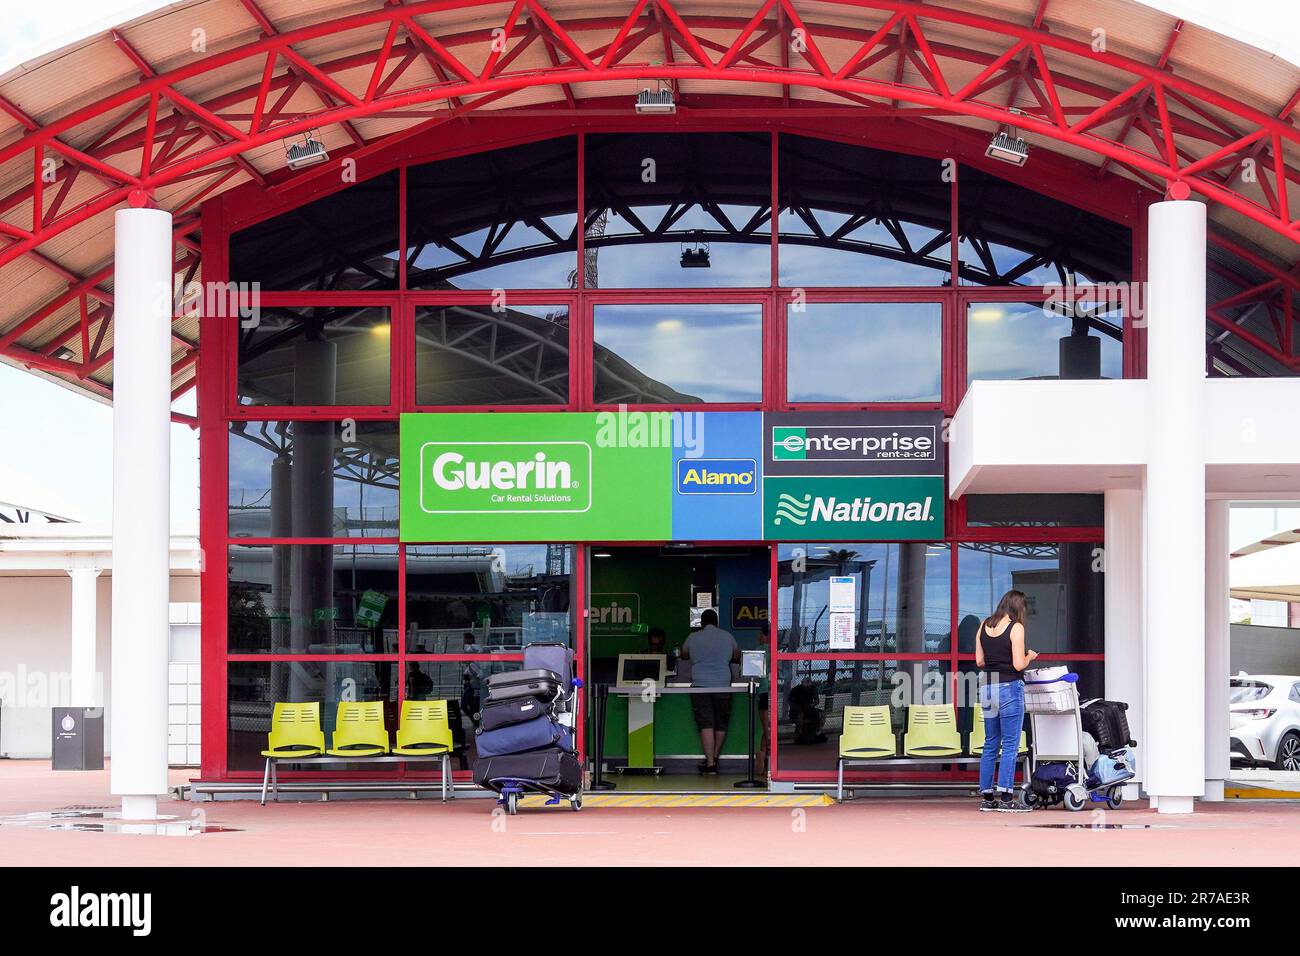 Guerin, Alamo, Enterprise and National car hire outlet and cusstomer desk, at FAro airport, Algarve, Portugal Stock Photo